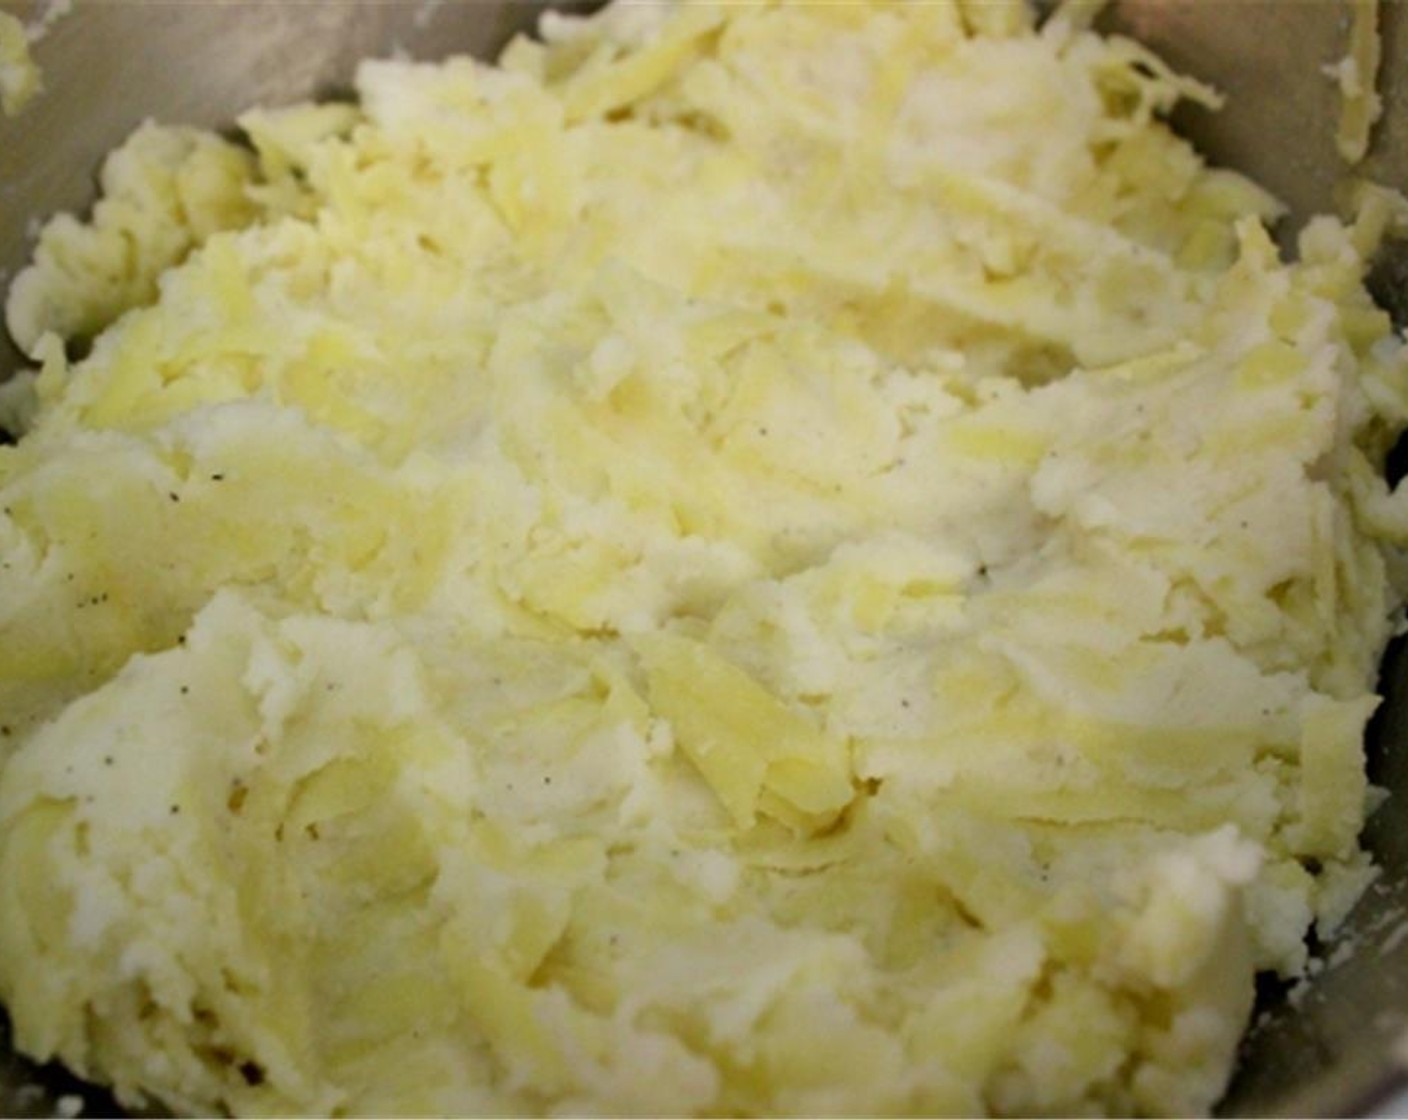 step 2 Combine the grated potatoes with Mashed Potatoes (2 1/2 cups). Season with Salt (1 tsp) and Ground Black Pepper (1/2 tsp). Set aside.